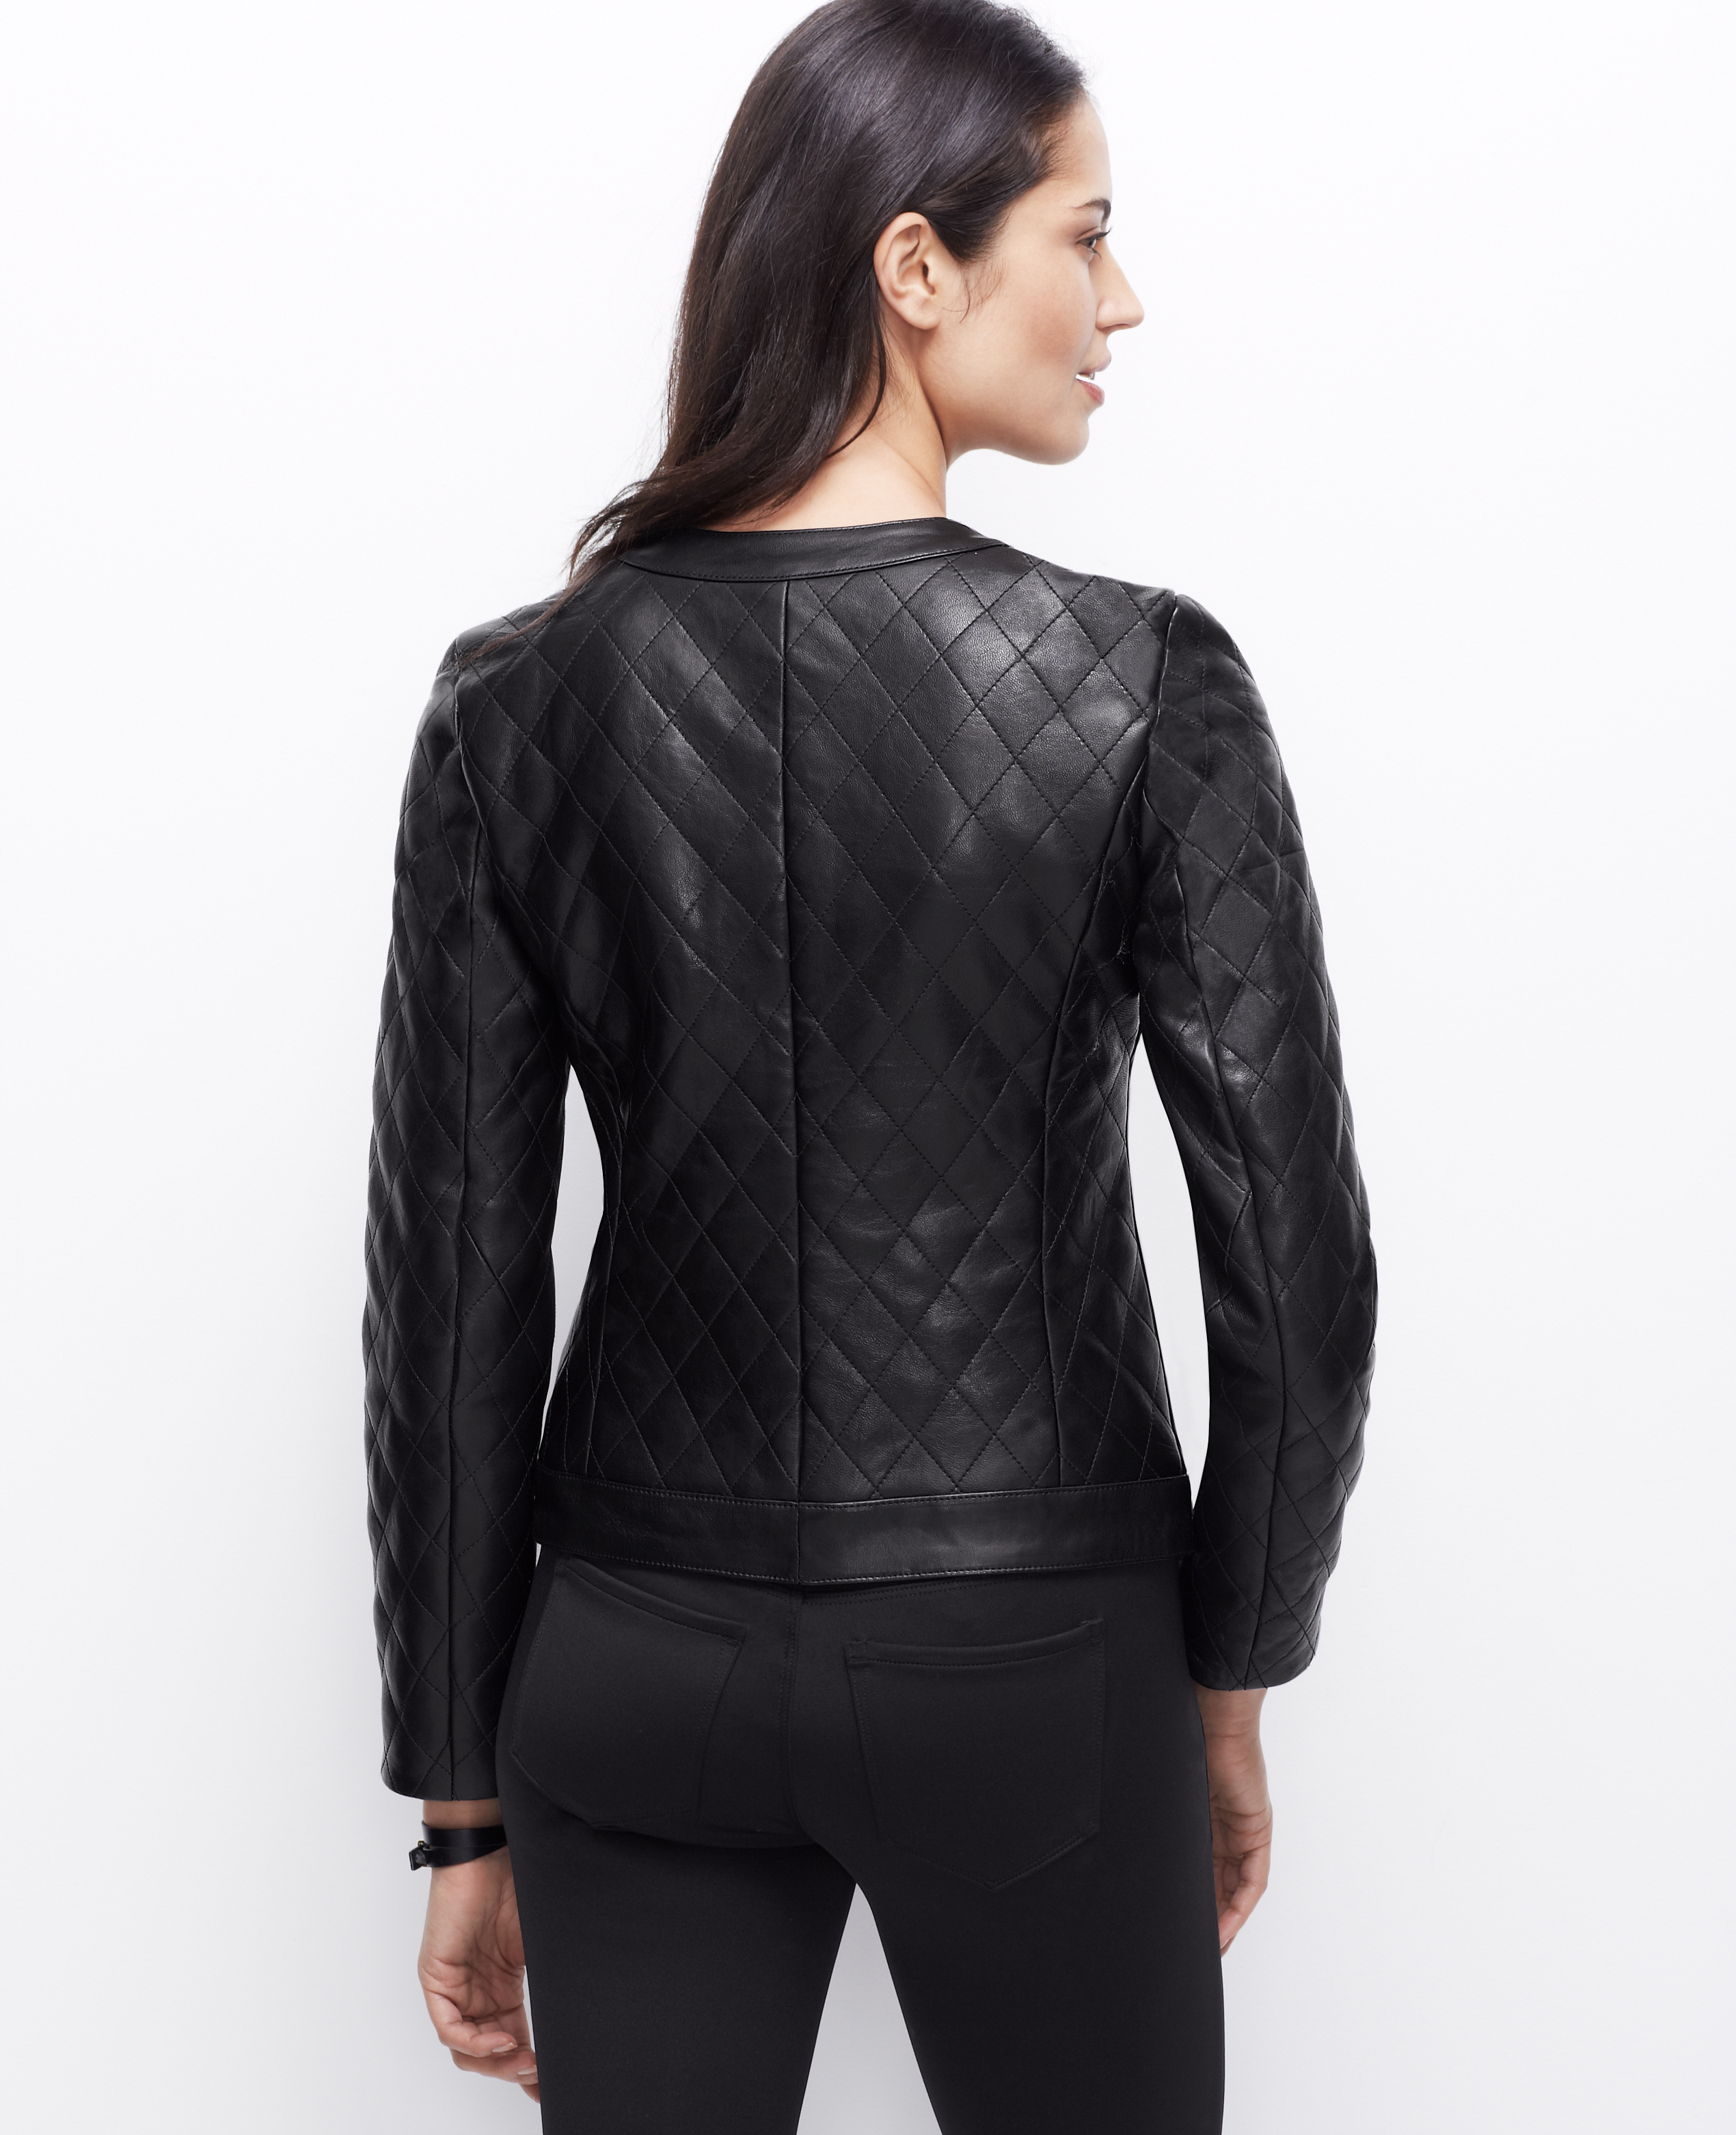 Lyst - Ann Taylor Quilted Leather Jacket in Black